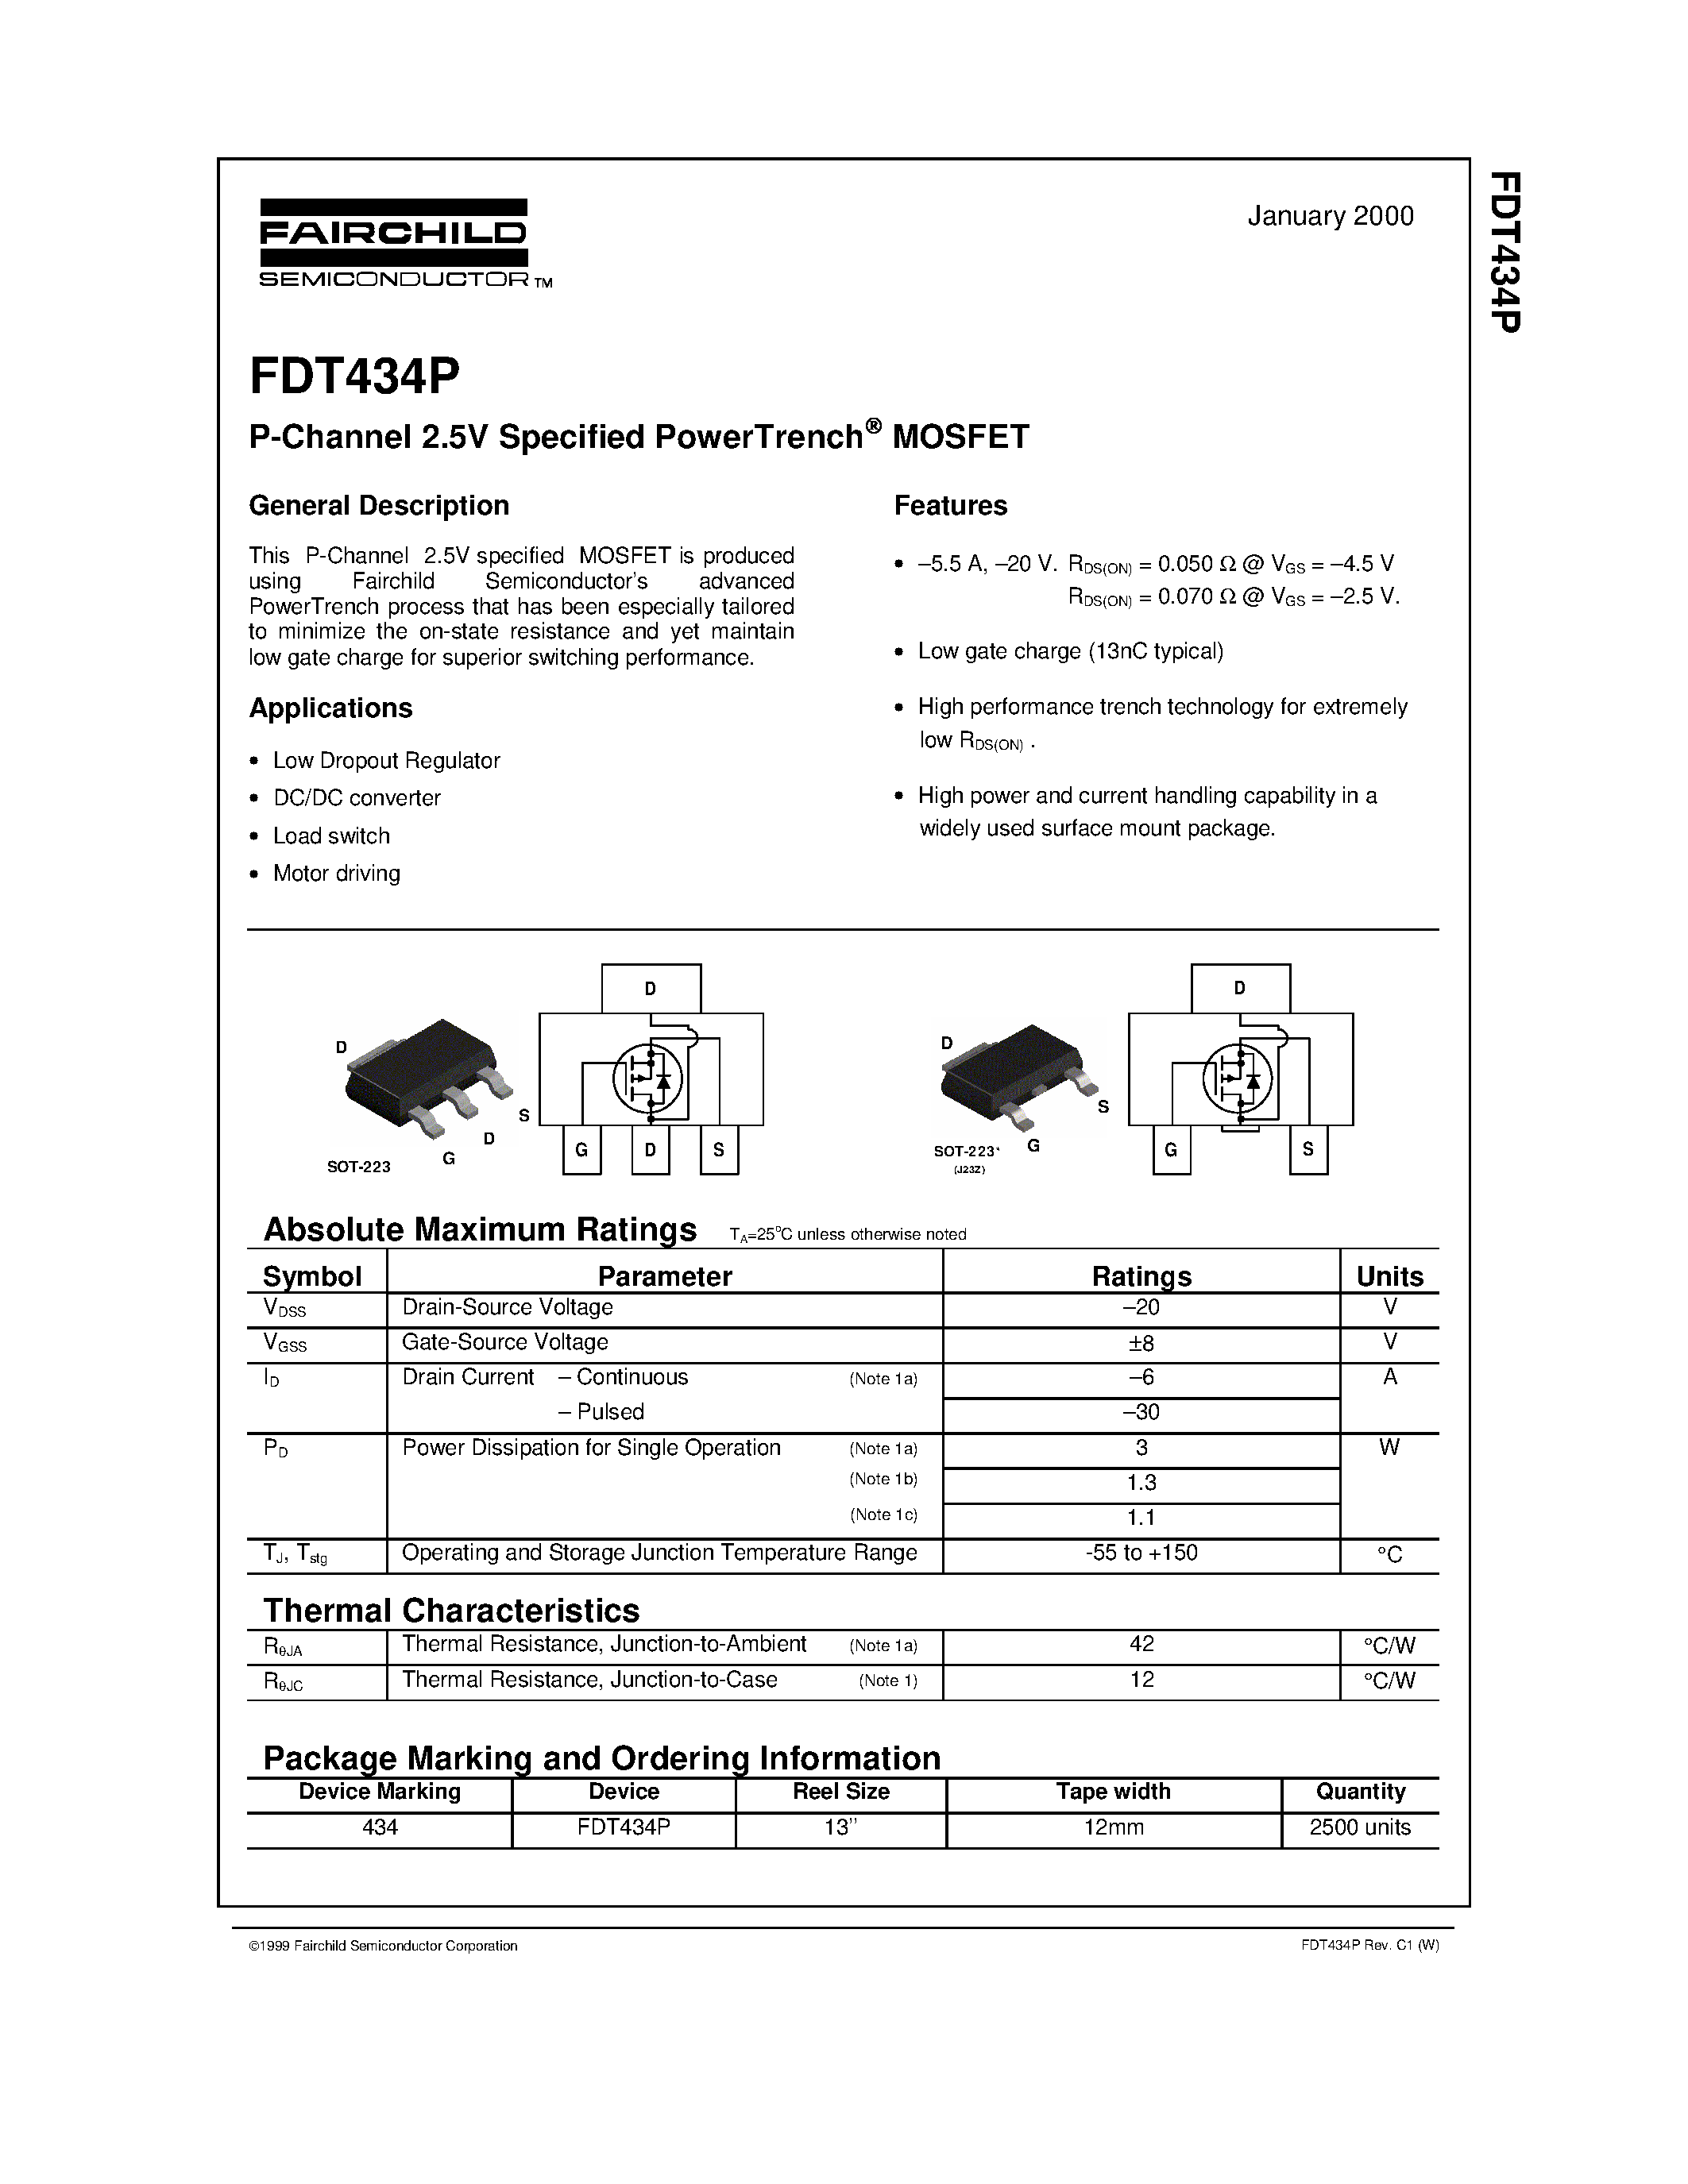 Даташит FDT434 - P-Channel 2.5V Specified PowerTrench MOSFET страница 1